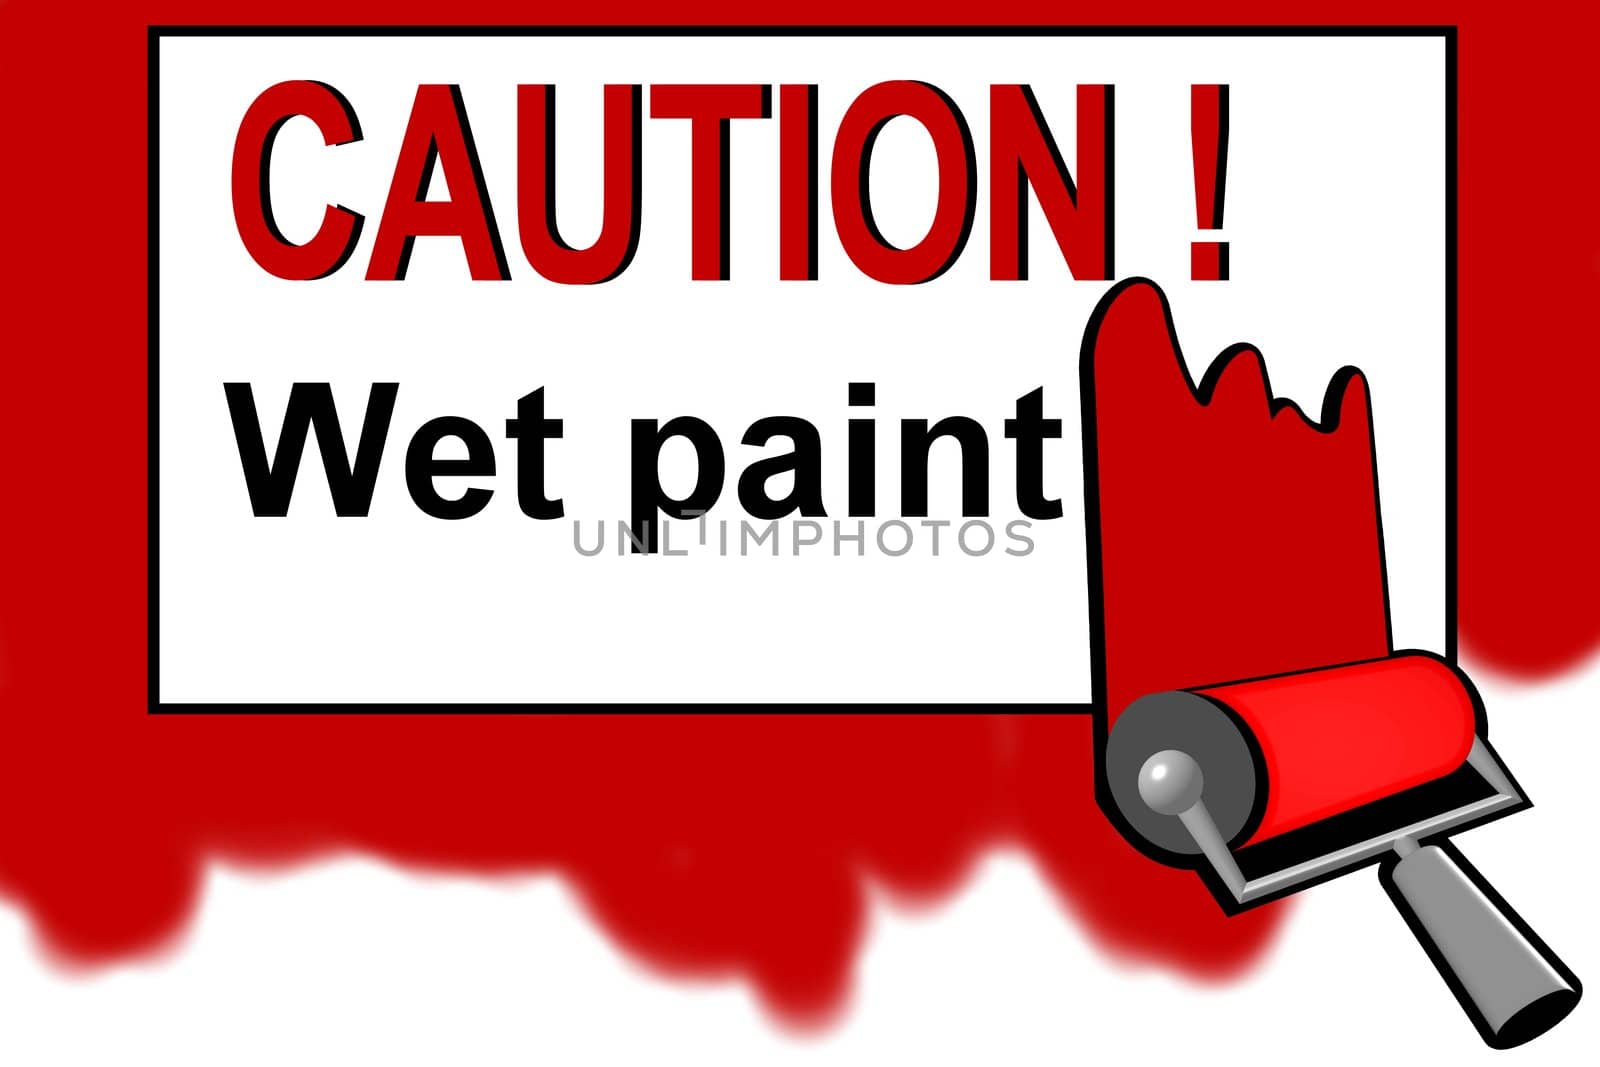 Caution - wet paint warning sign